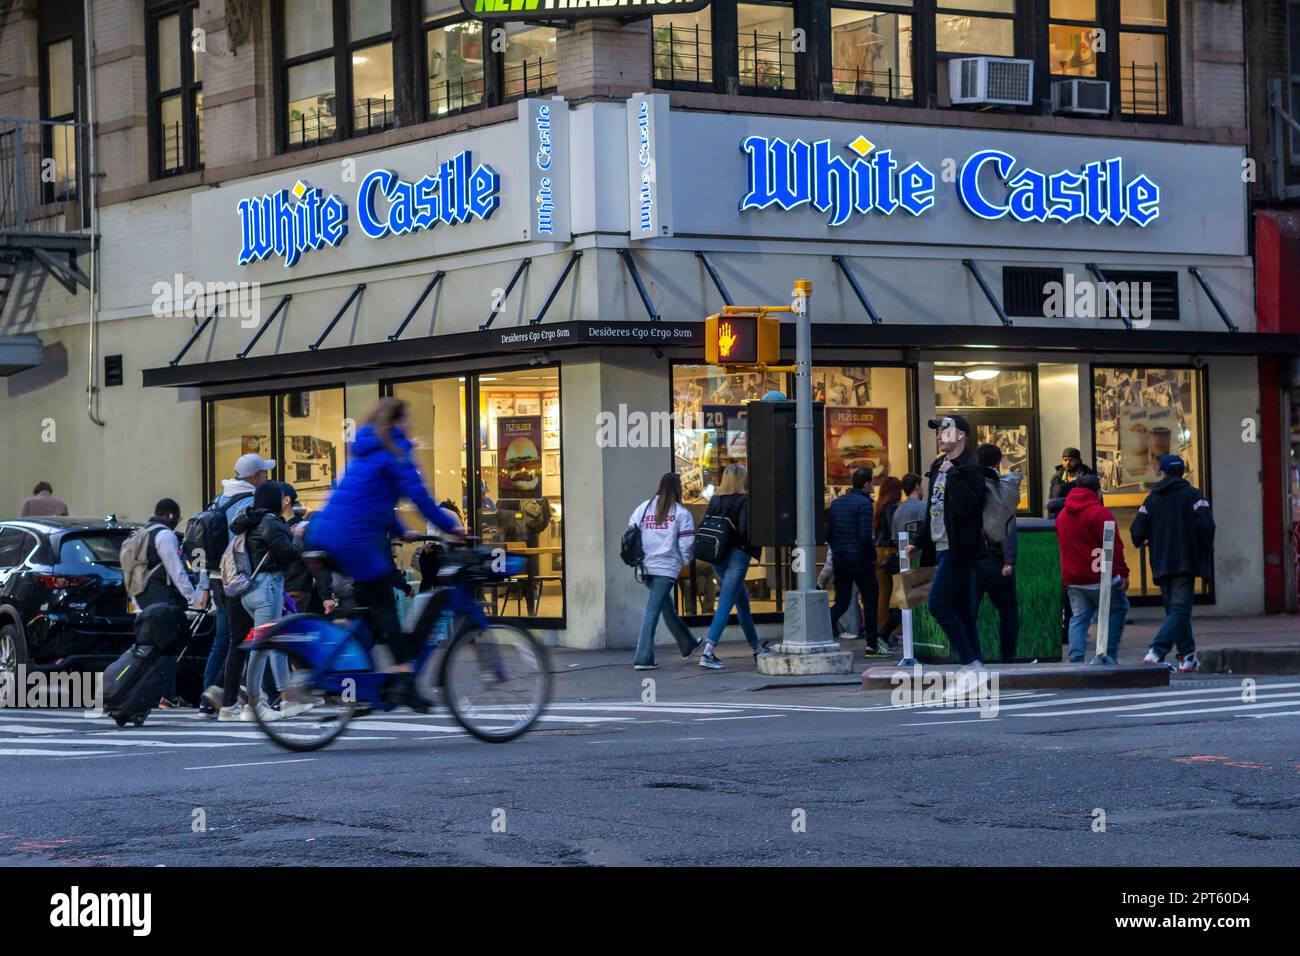 A White Castle in Midtown Manhattan in New York on Wednesday, April 19, 2023. (© Richard B. Levine) Stock Photo